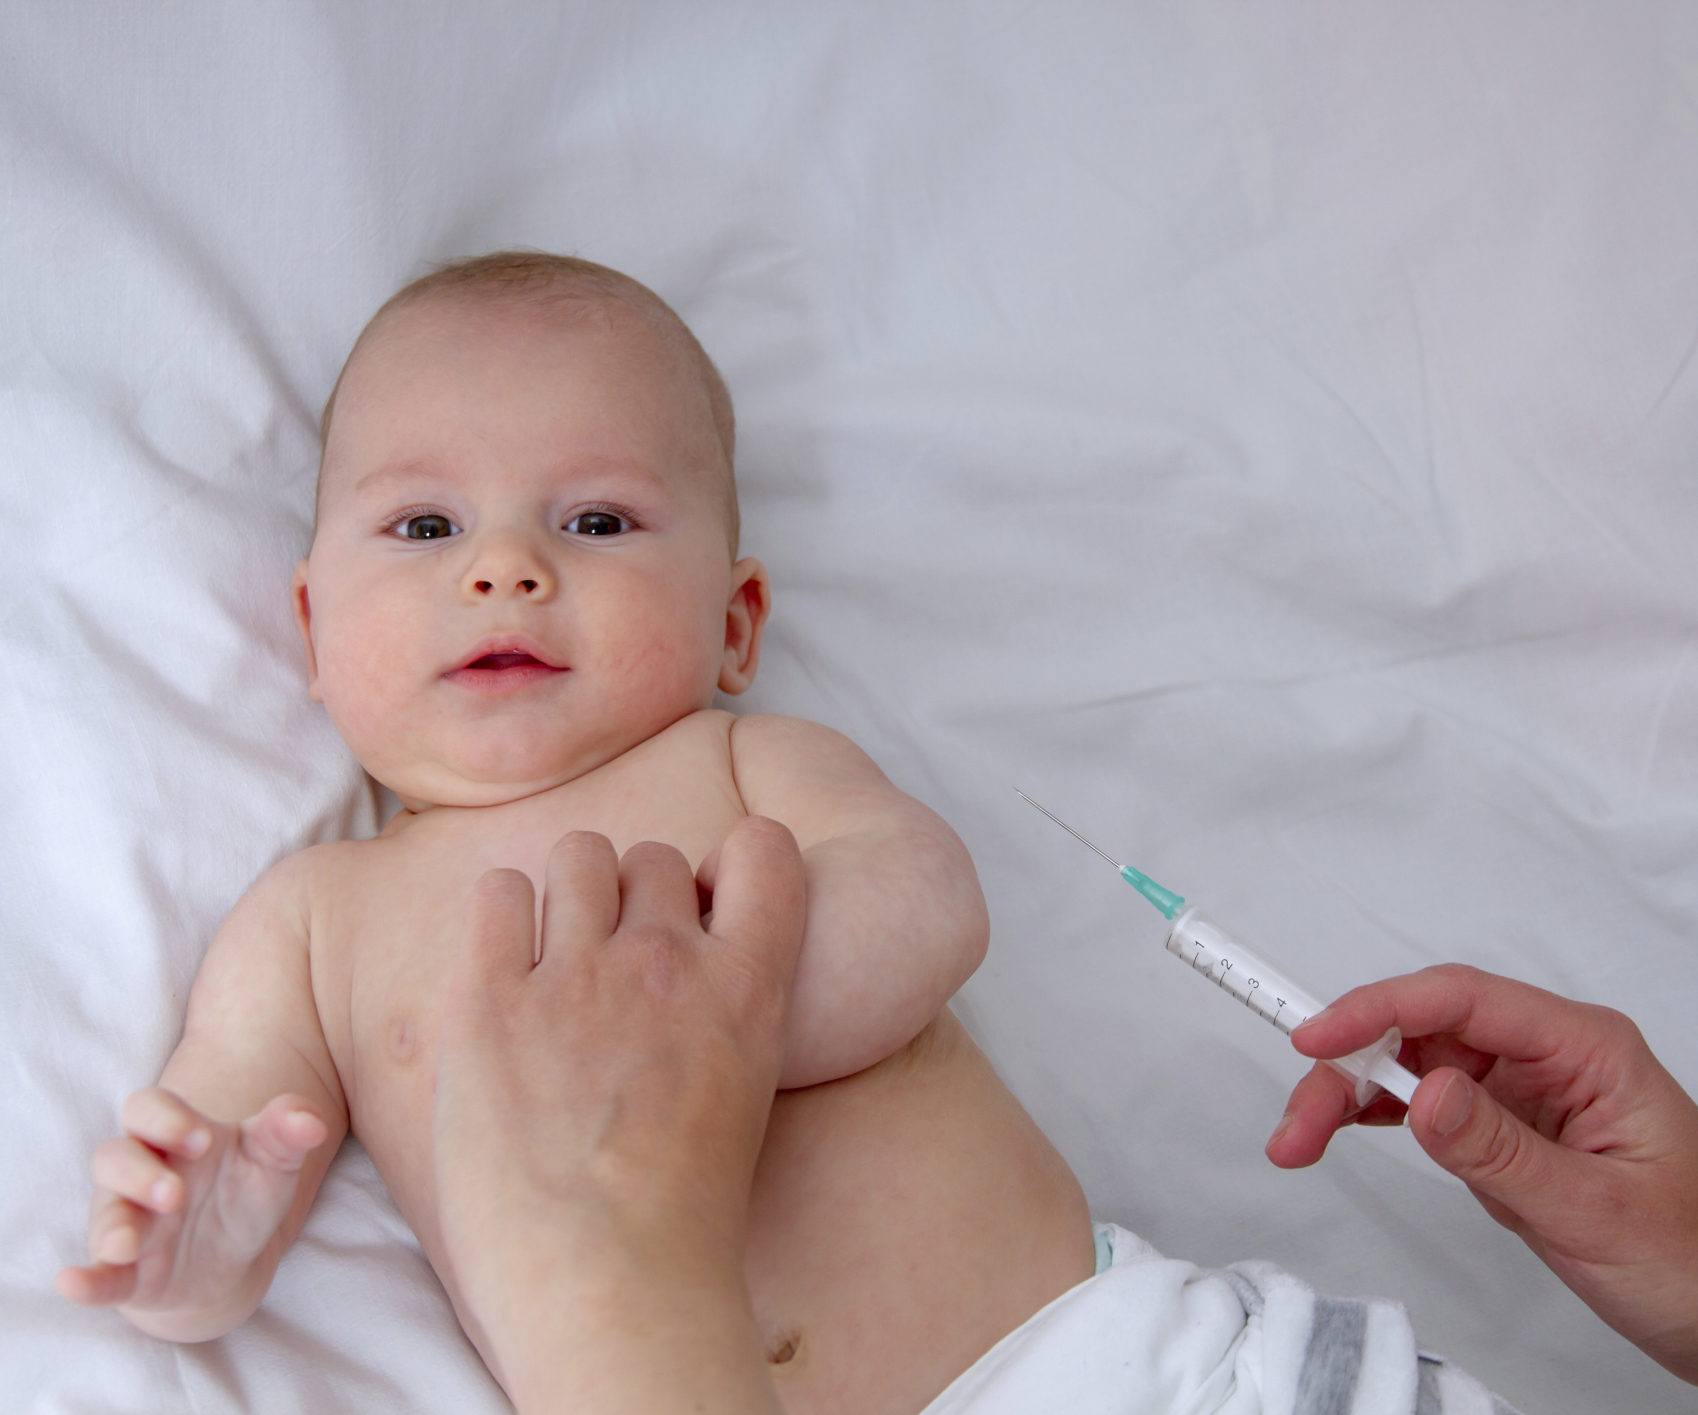 Anti-vax mum passed on whooping cough to her baby daughter